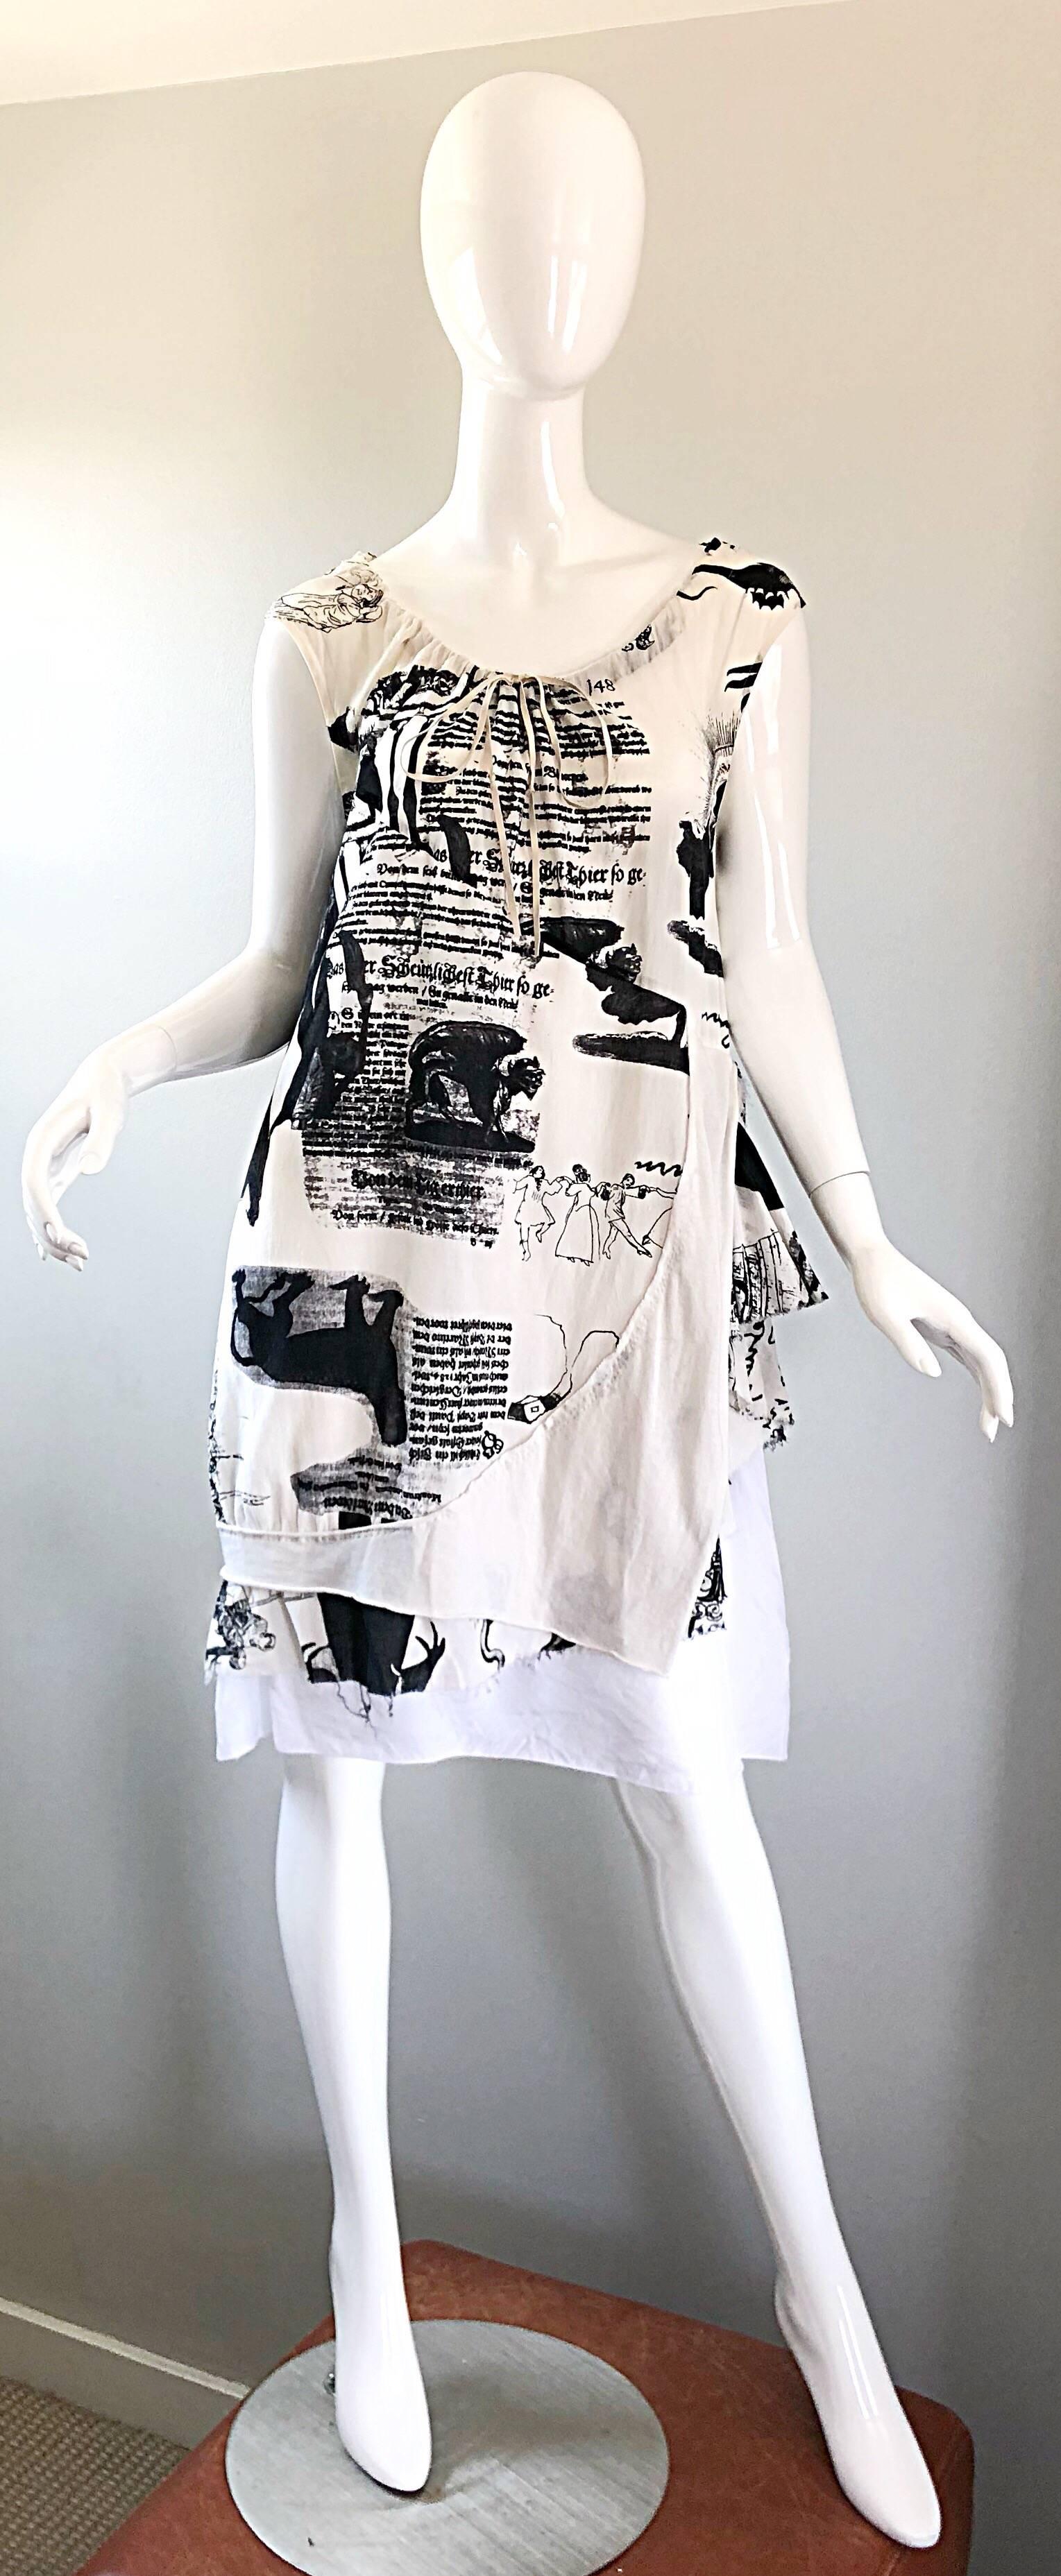 Rare vintage 56G S/S 2006 Japanese designer black and white newspaper / novelty print cotton sac dress! Features prints of newspaper / book clipping, gargoyles, and dancing witches. Suede leather ties at neck. Simply slips over the head. Can be worn